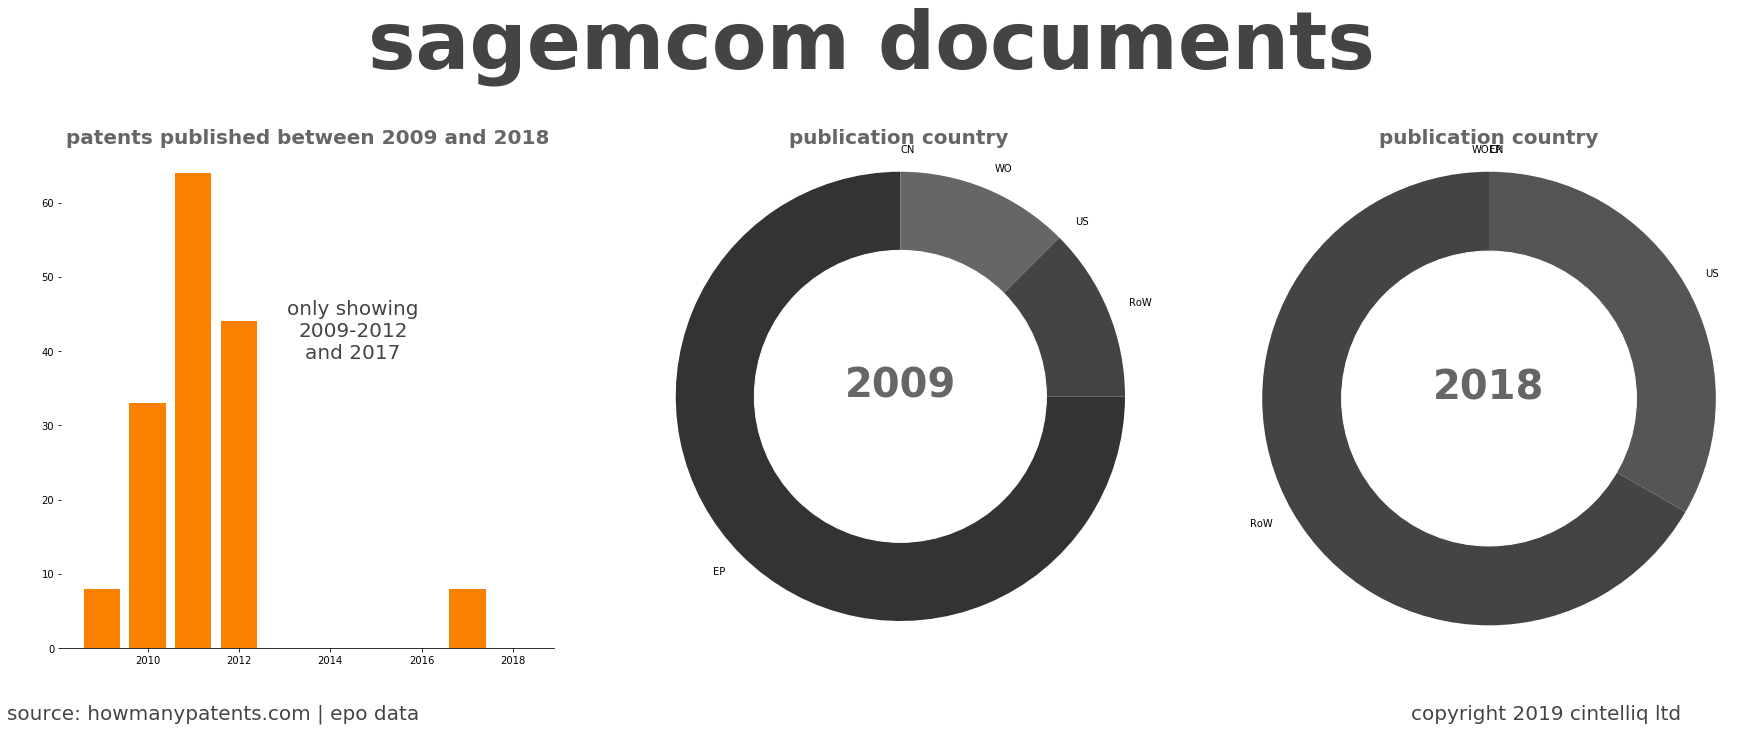 summary of patents for Sagemcom Documents